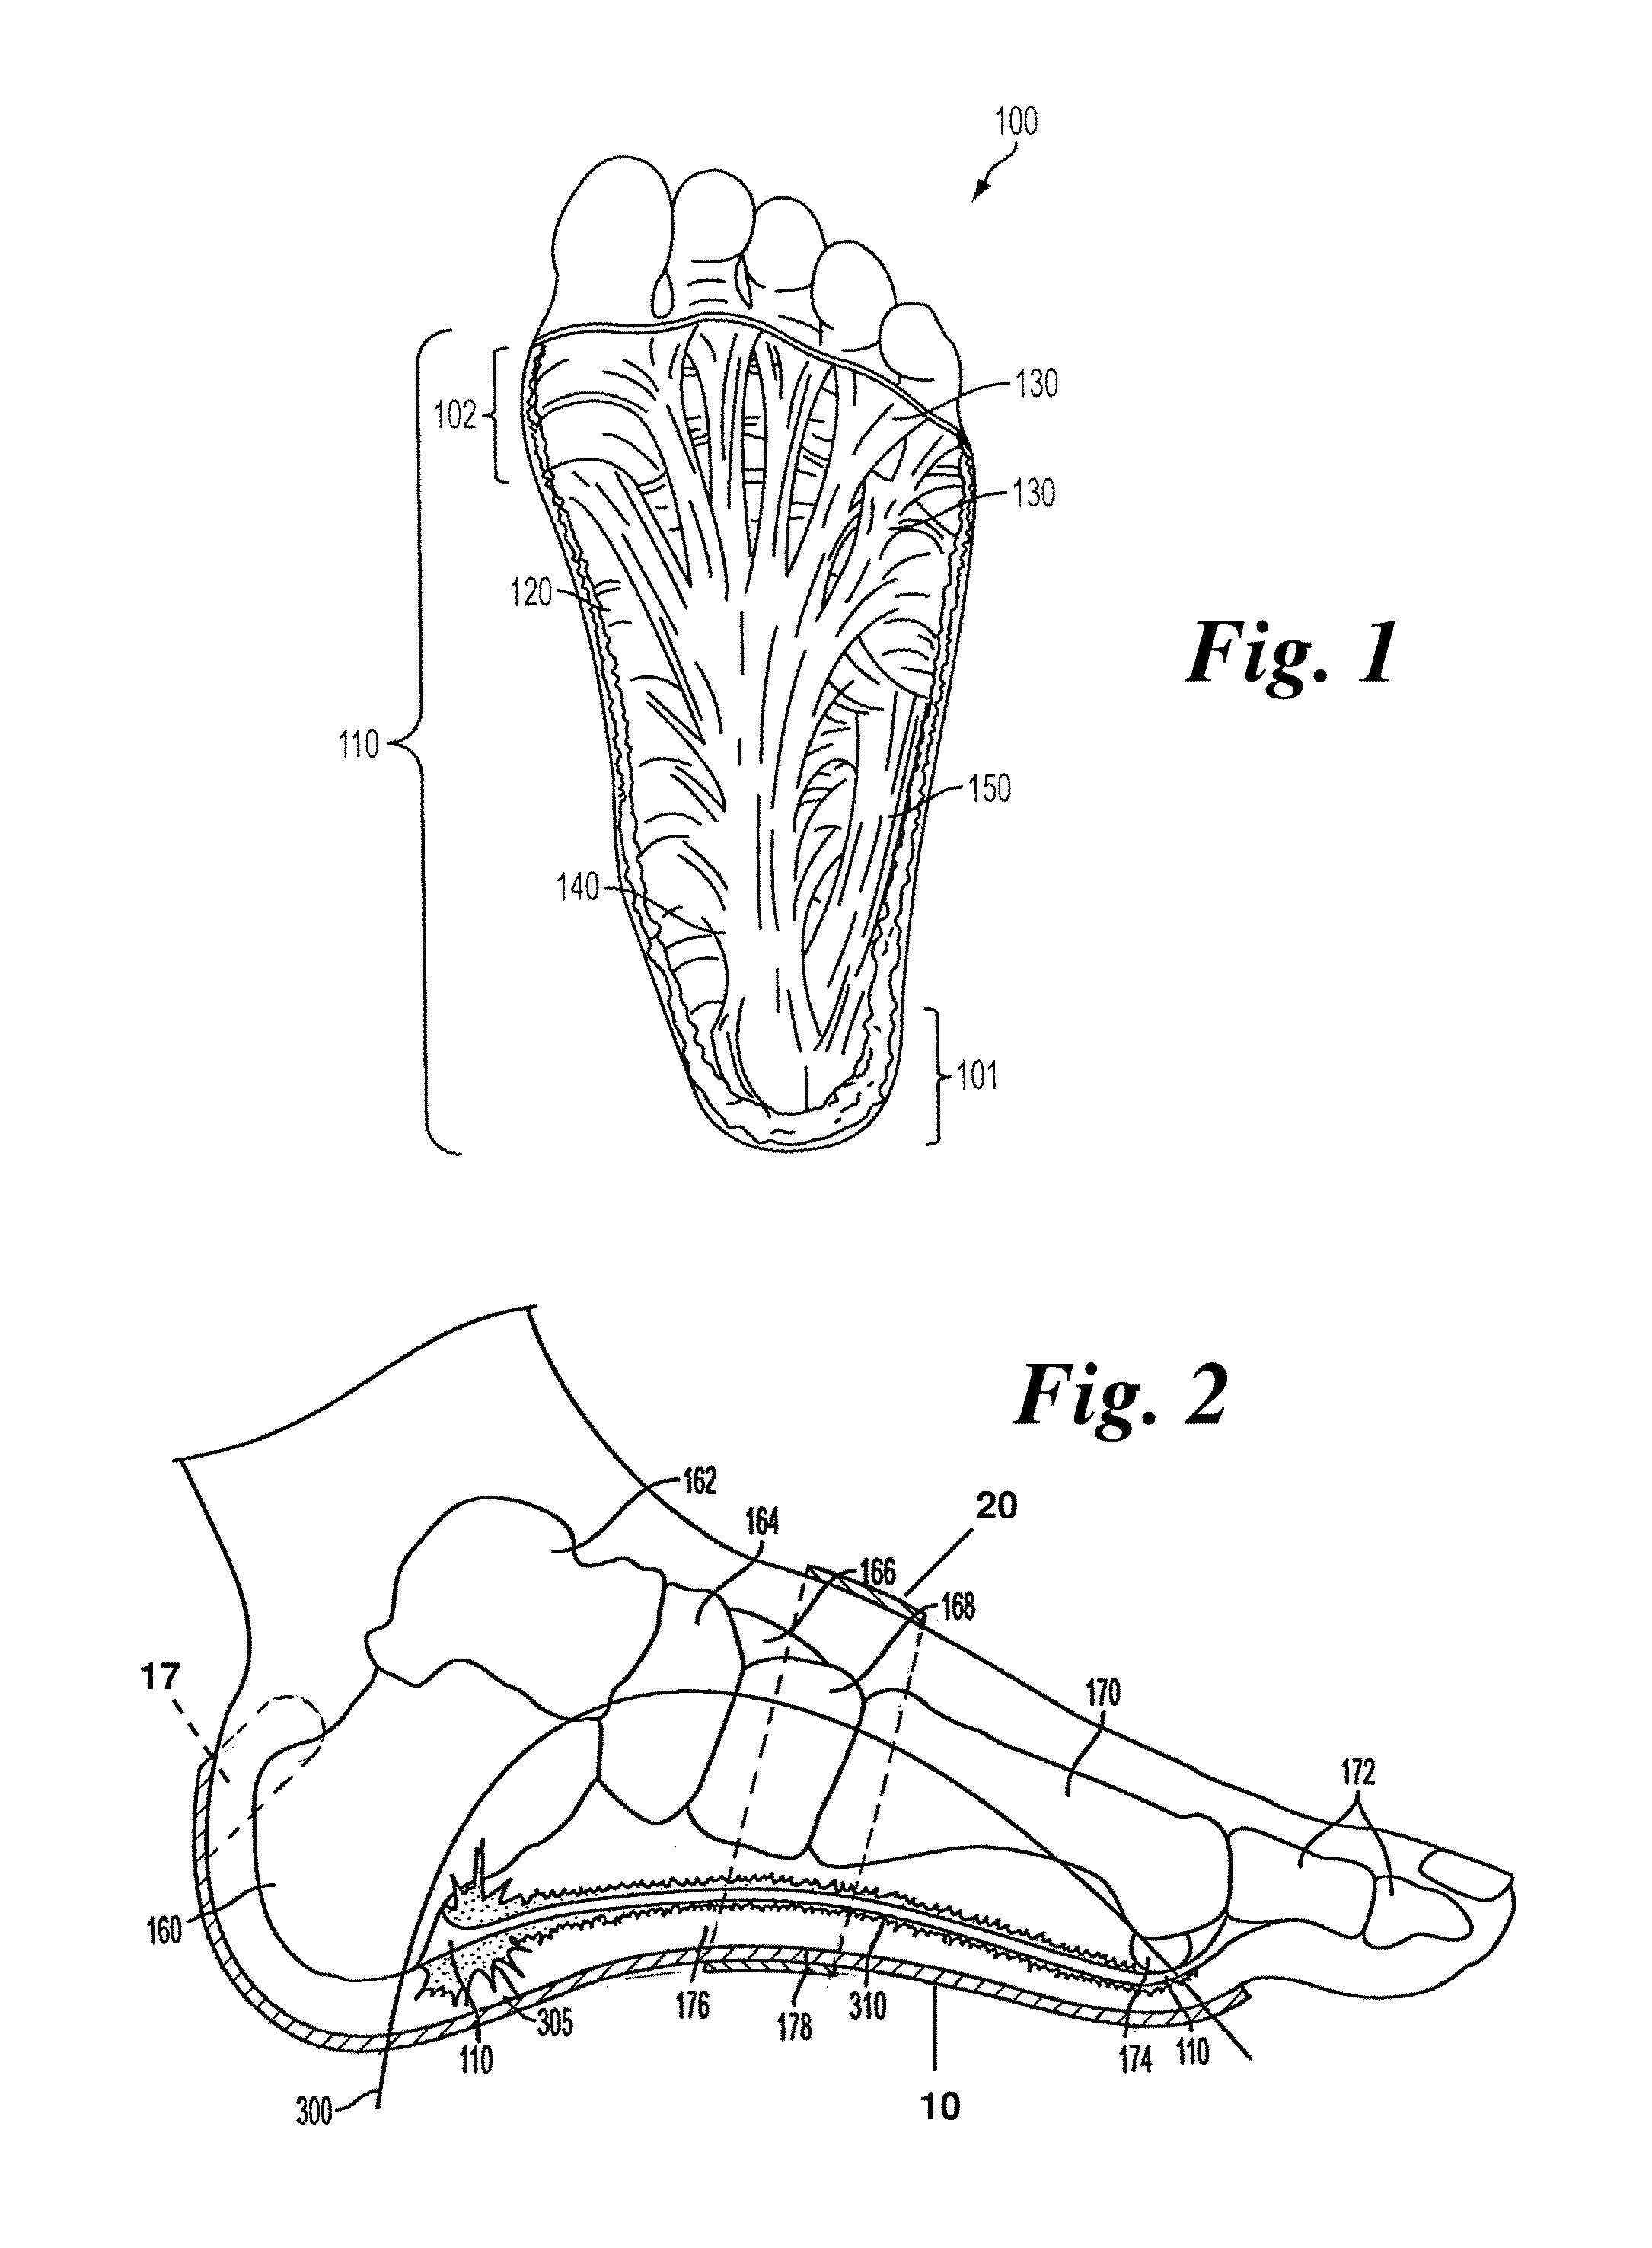 Disposable two-part orthotic foot support strap system and method